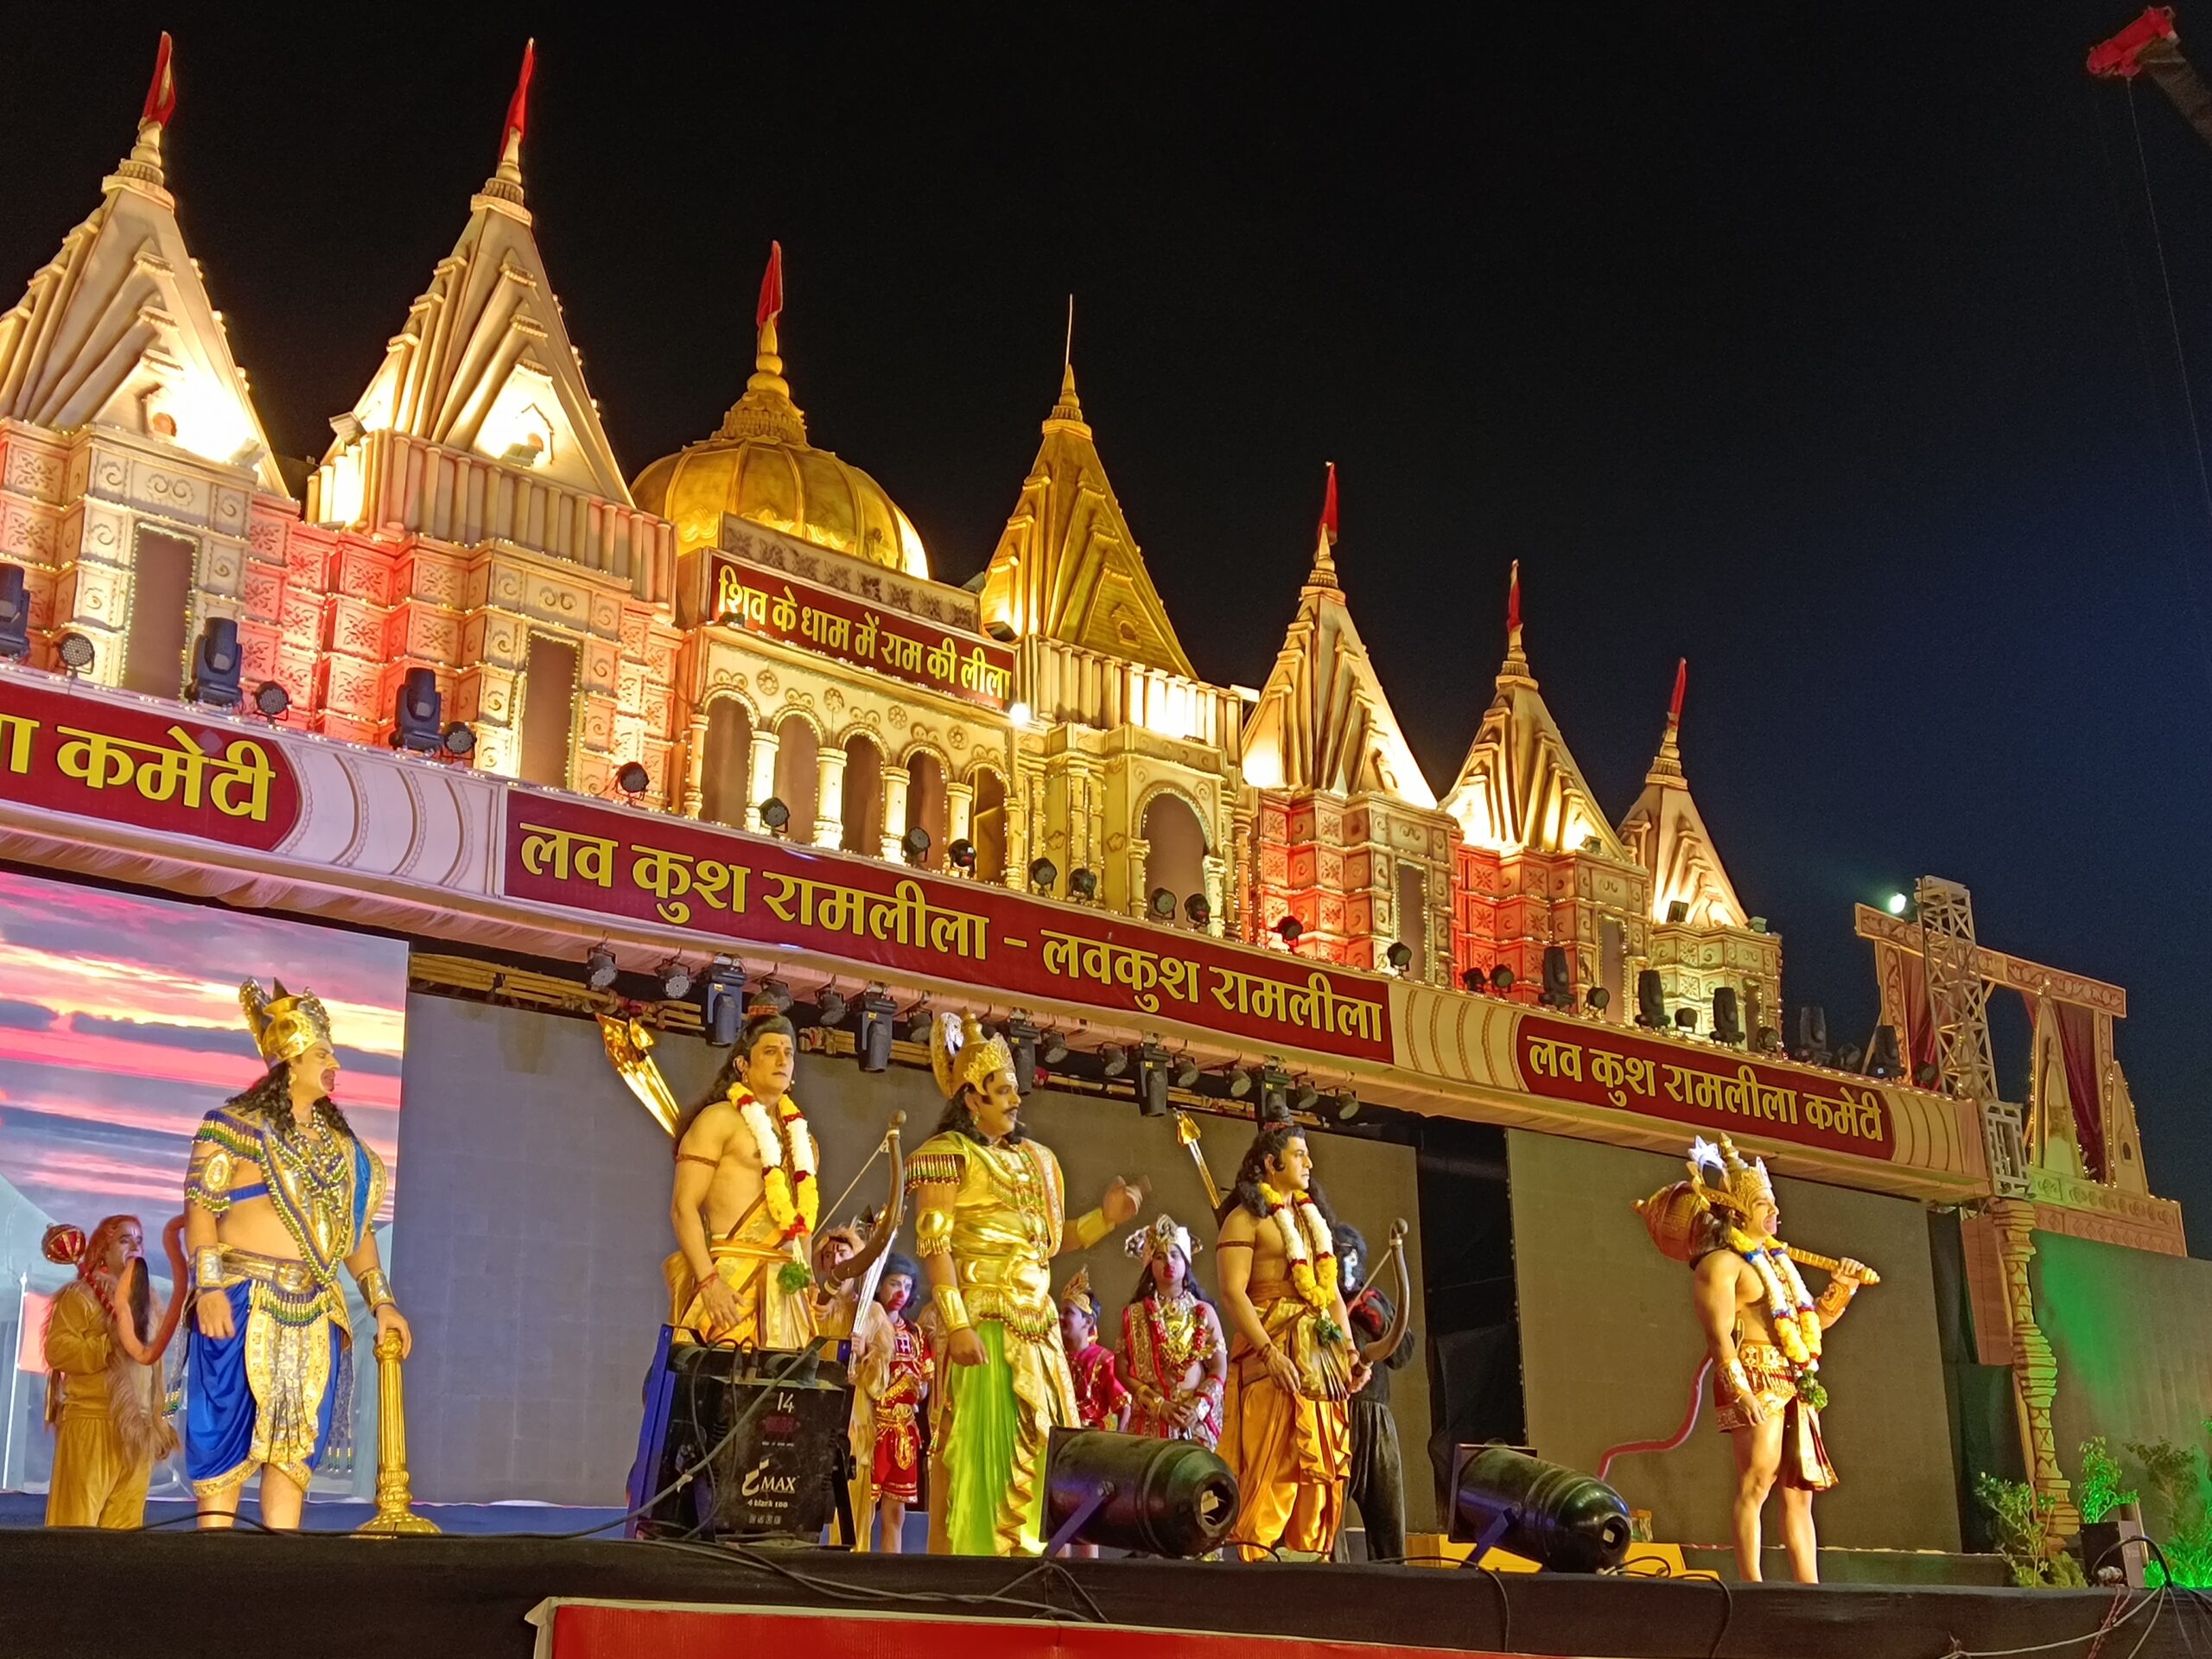 State-of-the-art technology and Kangana Ranaut’s debut: a look at the Luv Kush Ramleela festivities at Red Fort